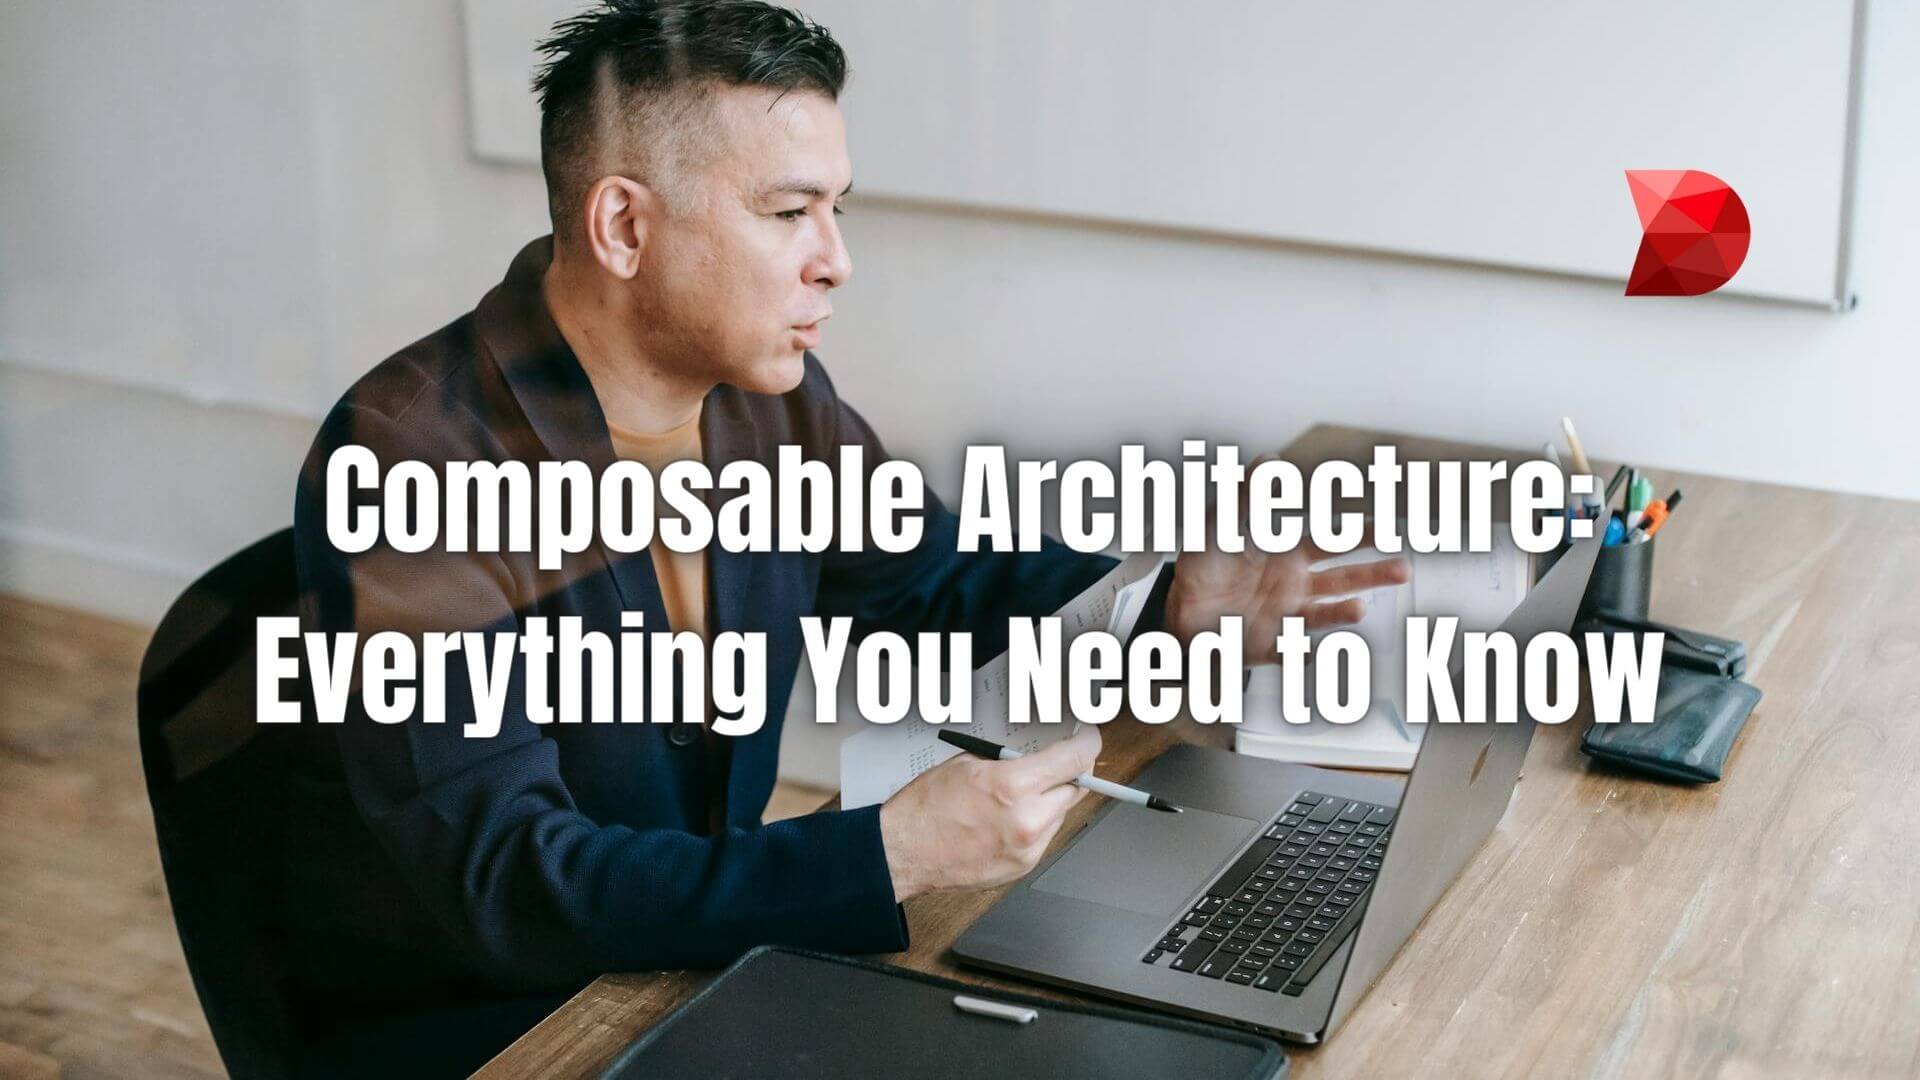 Transform your software projects with our expert guide to composable architecture. Learn proven strategies and best practices for success.